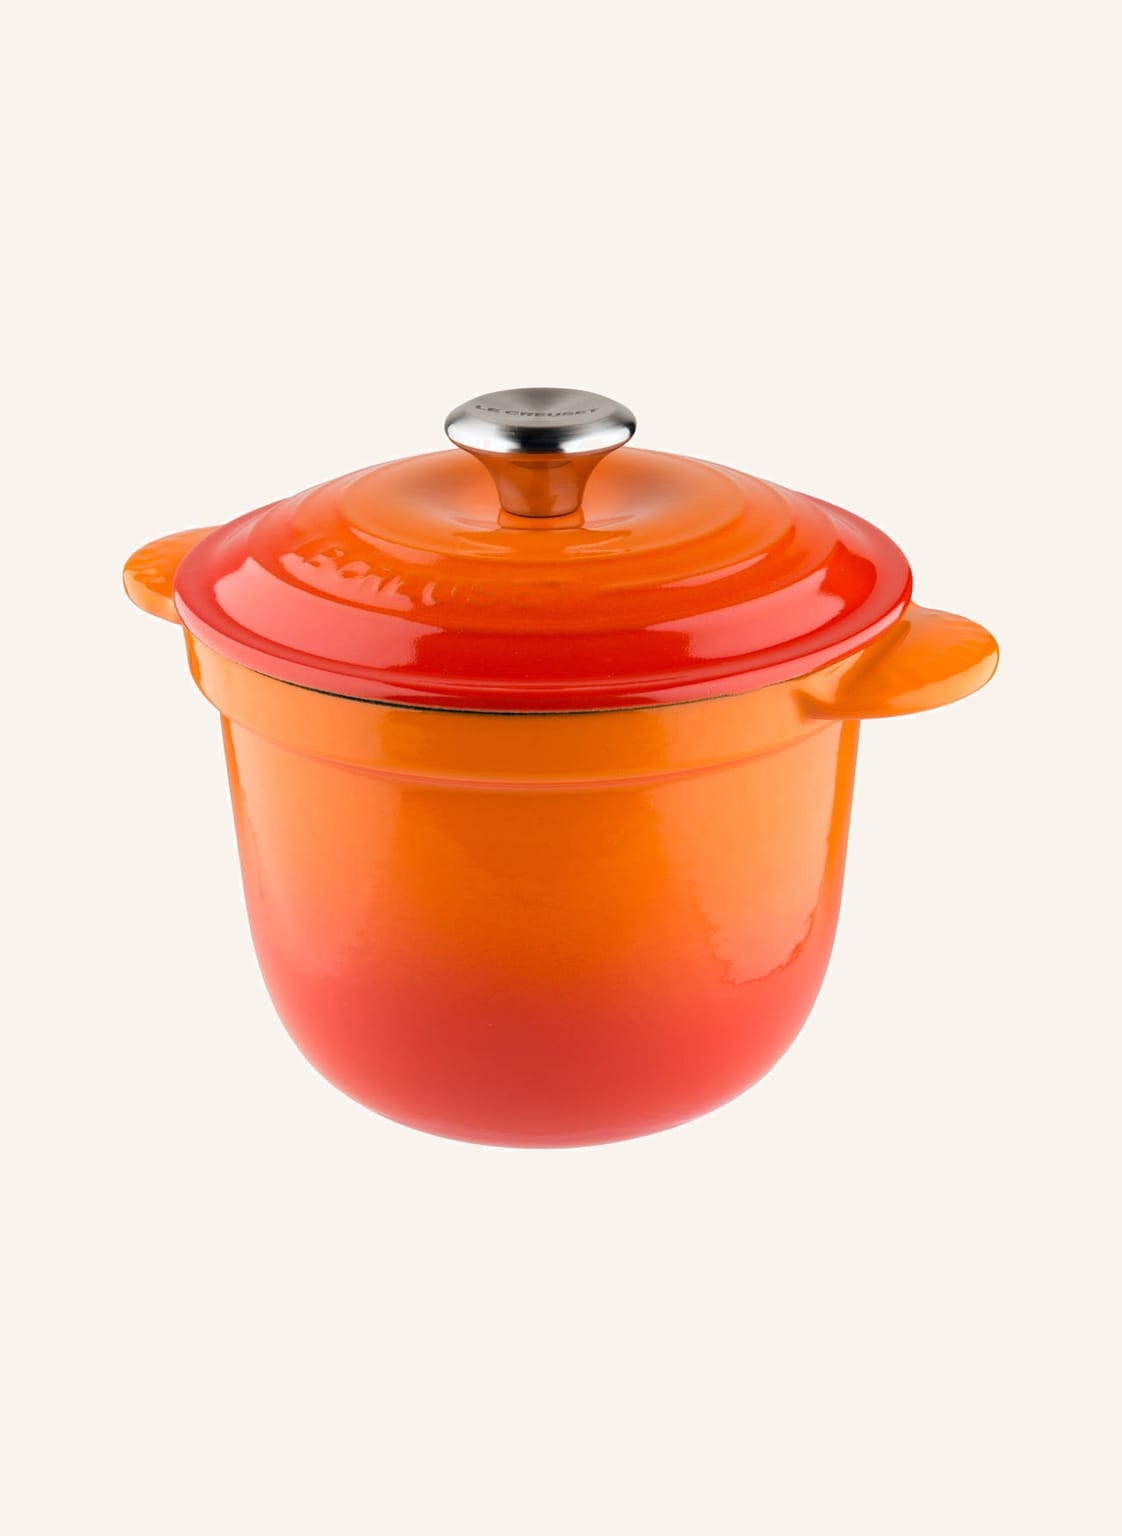 Image of Le Creuset Cocotte Every orange